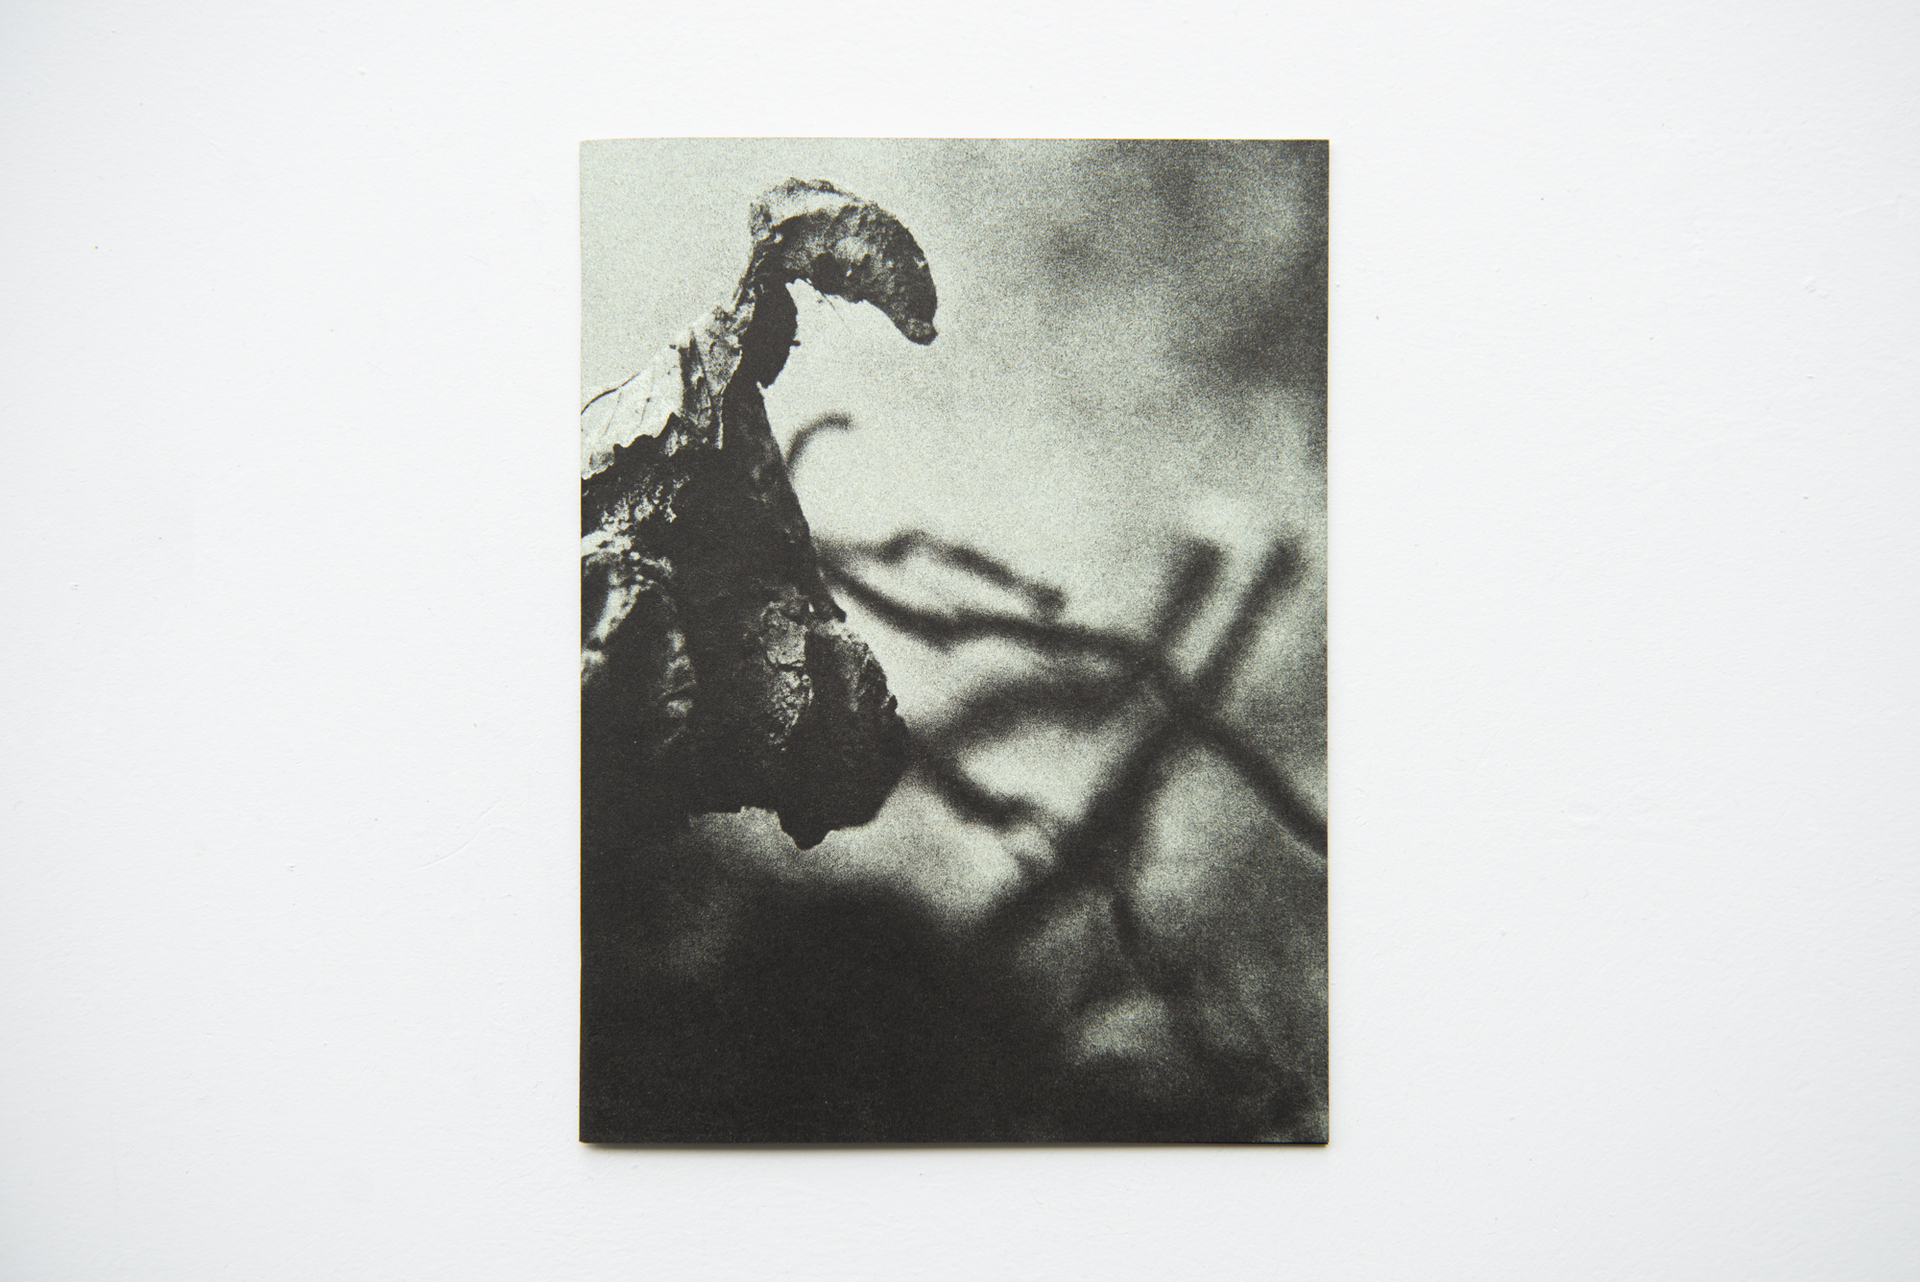 Tom Hardwick-Allan, Vogel, 2021, risograph published by Weinspach, 20 pages, 20 x 15 cm